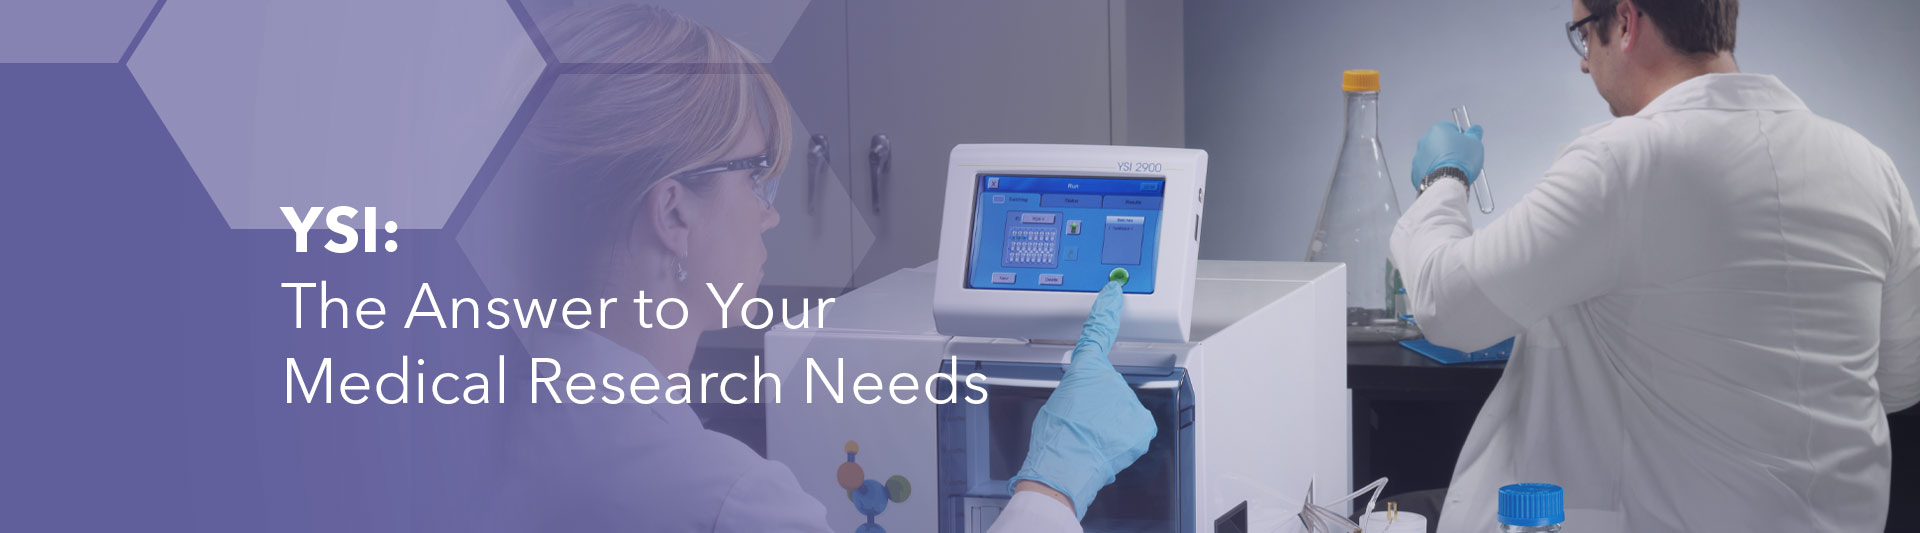 Medical Research Banner